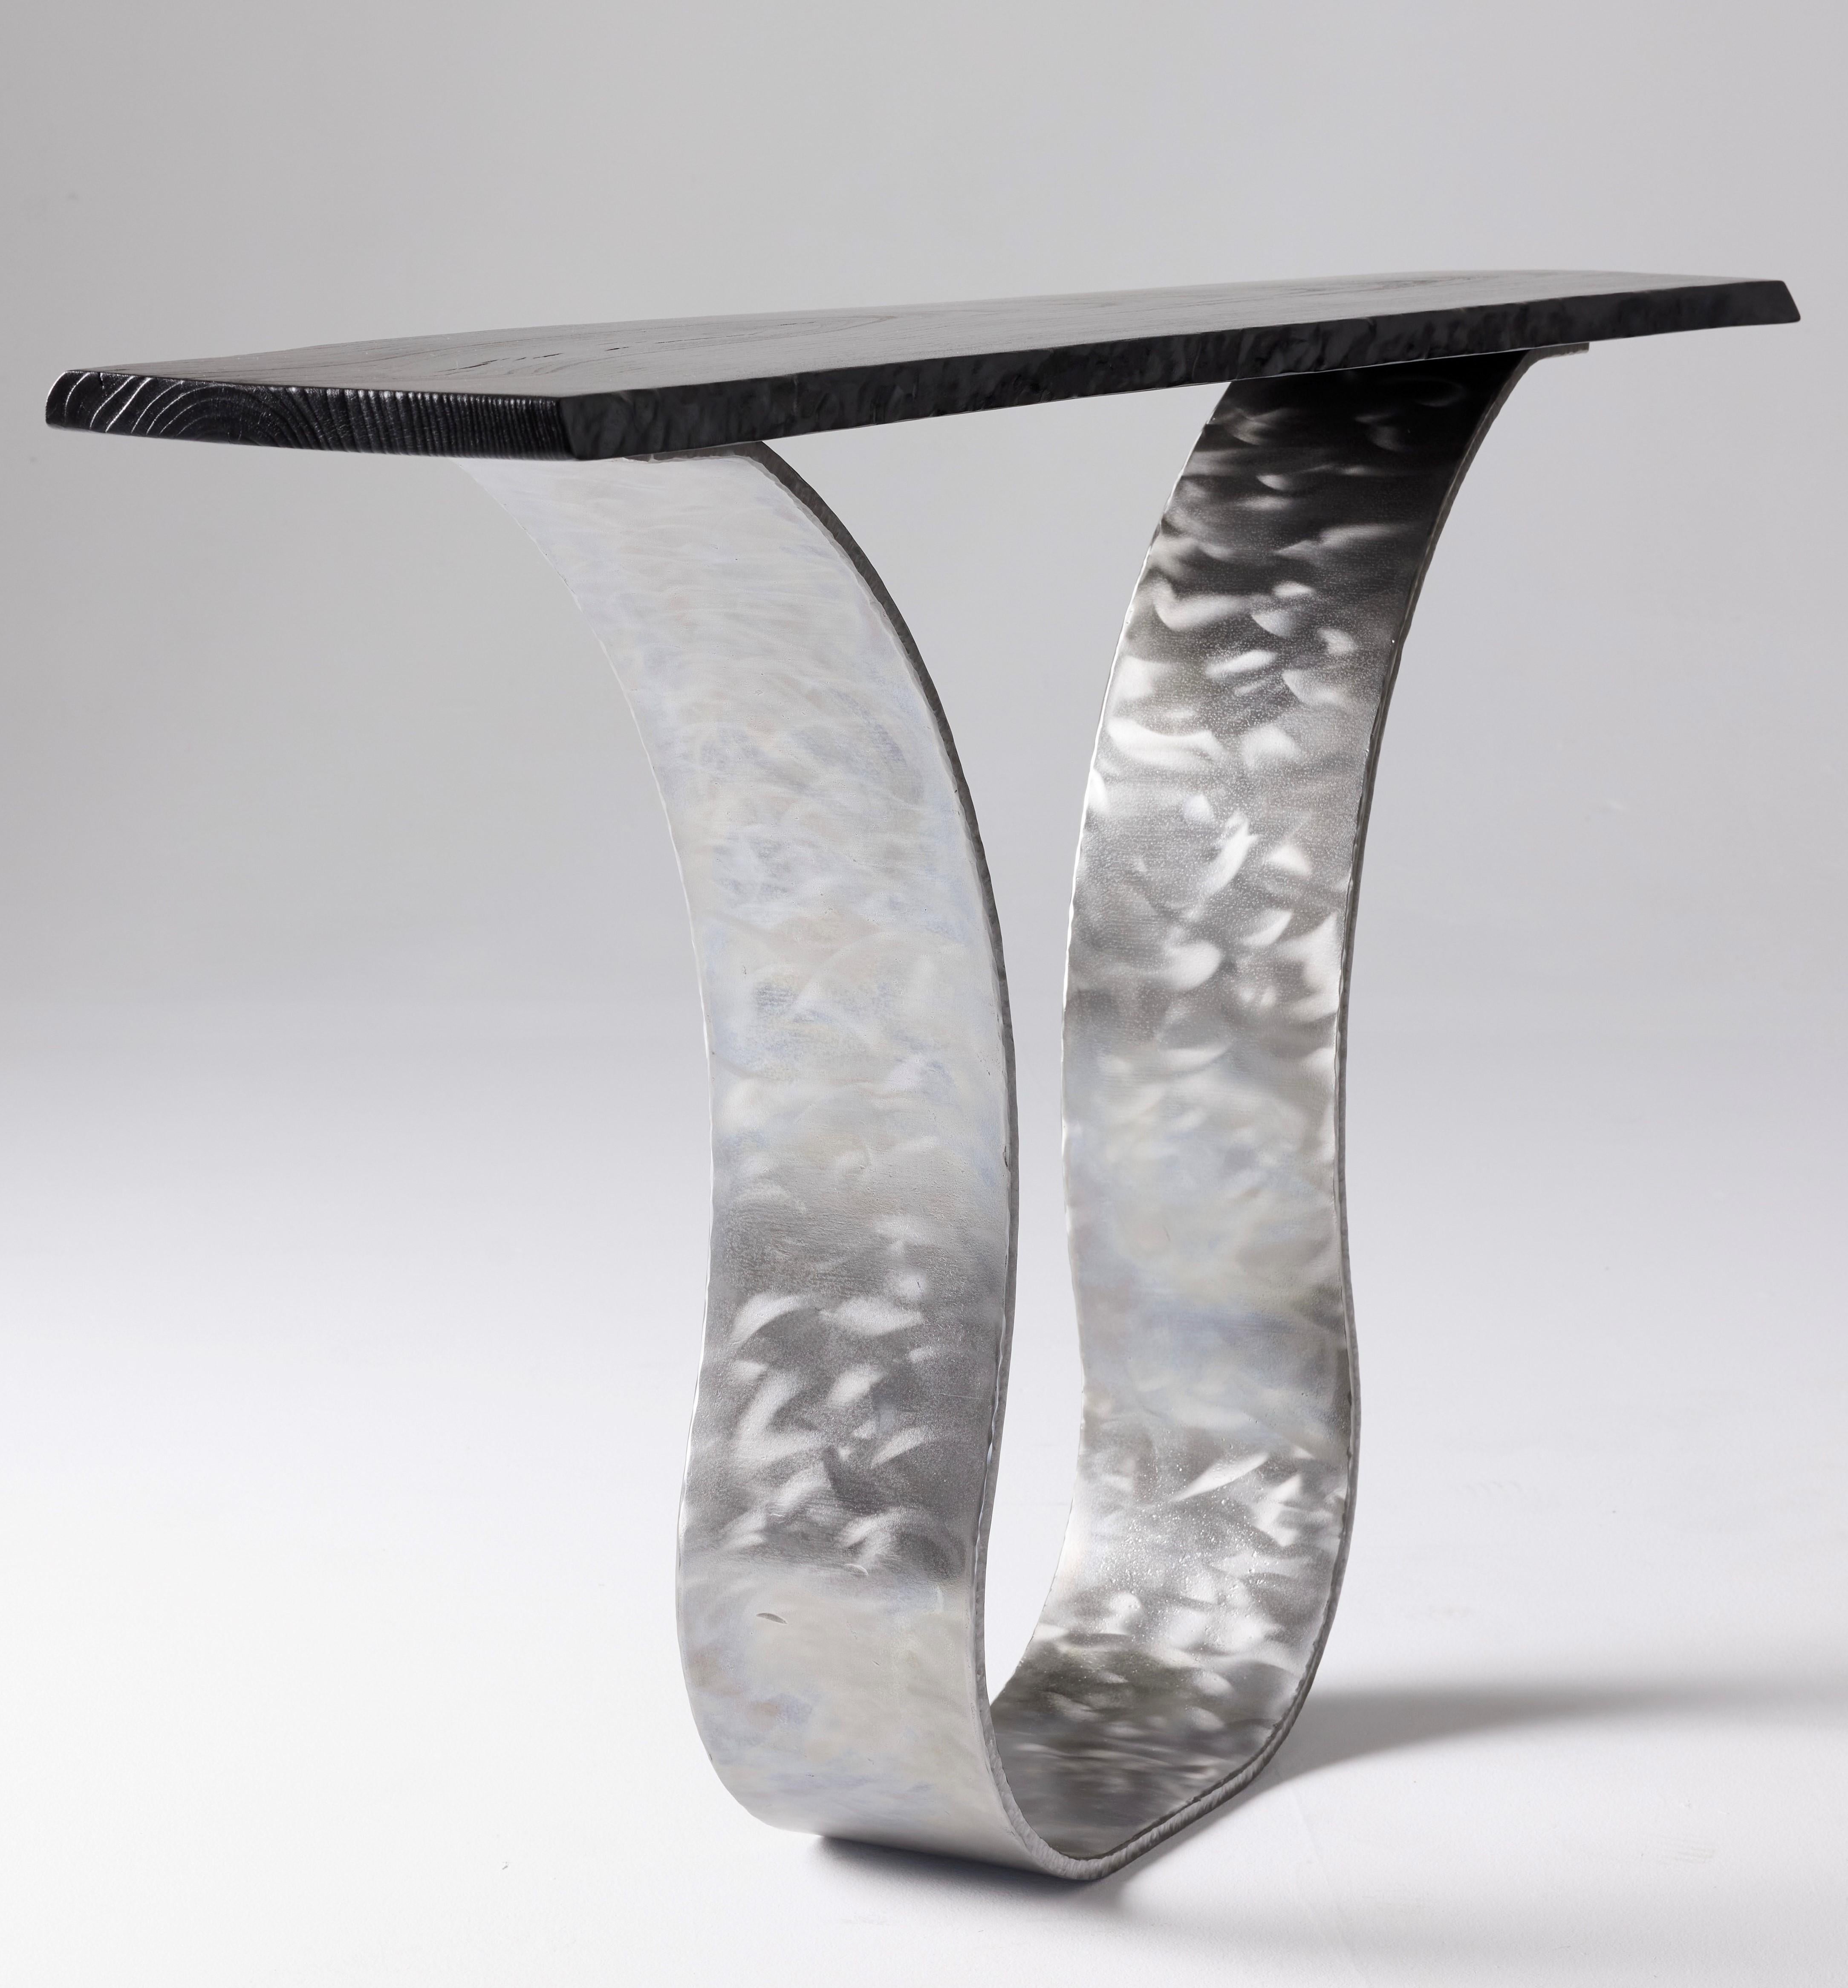 This elegant console table by Carlo Stenta is a sculptural entry table that combines modern-industrial with the organic. Recovery Furniture’s Tina Console in polished steel features a charred live edge slab of maple resting upon a solid steel base.